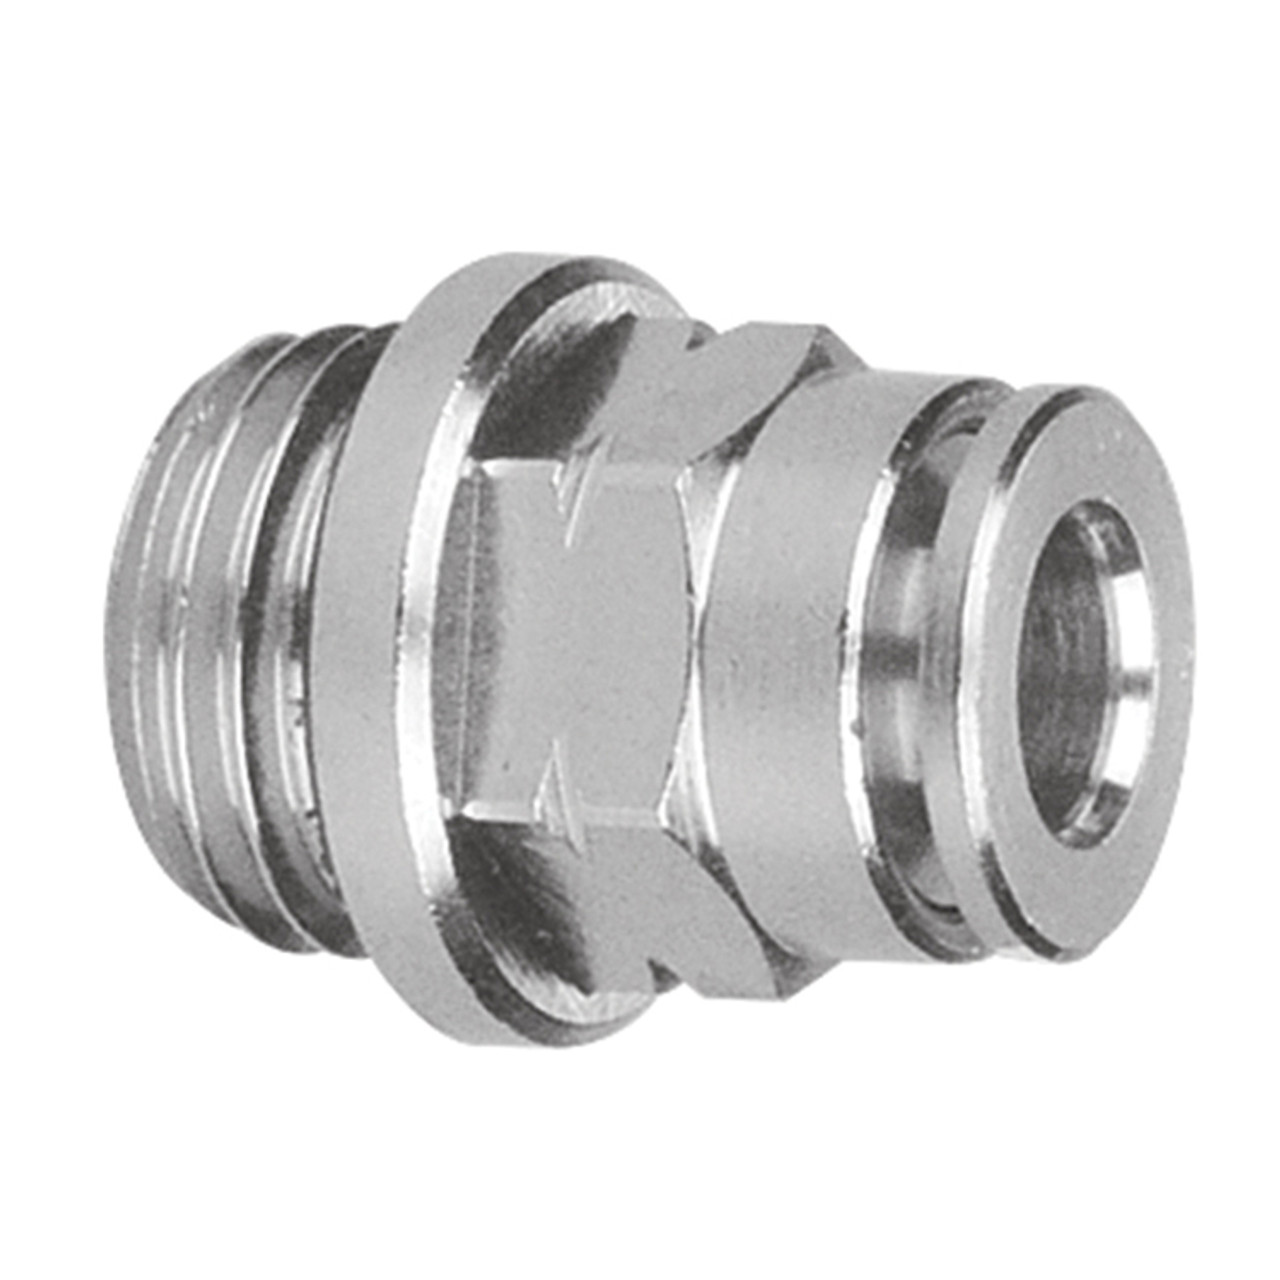 3/8 x 10mm Nickel Plated Brass Uni Thread - Push-To-Connect Connector   G60018PM-06-10M